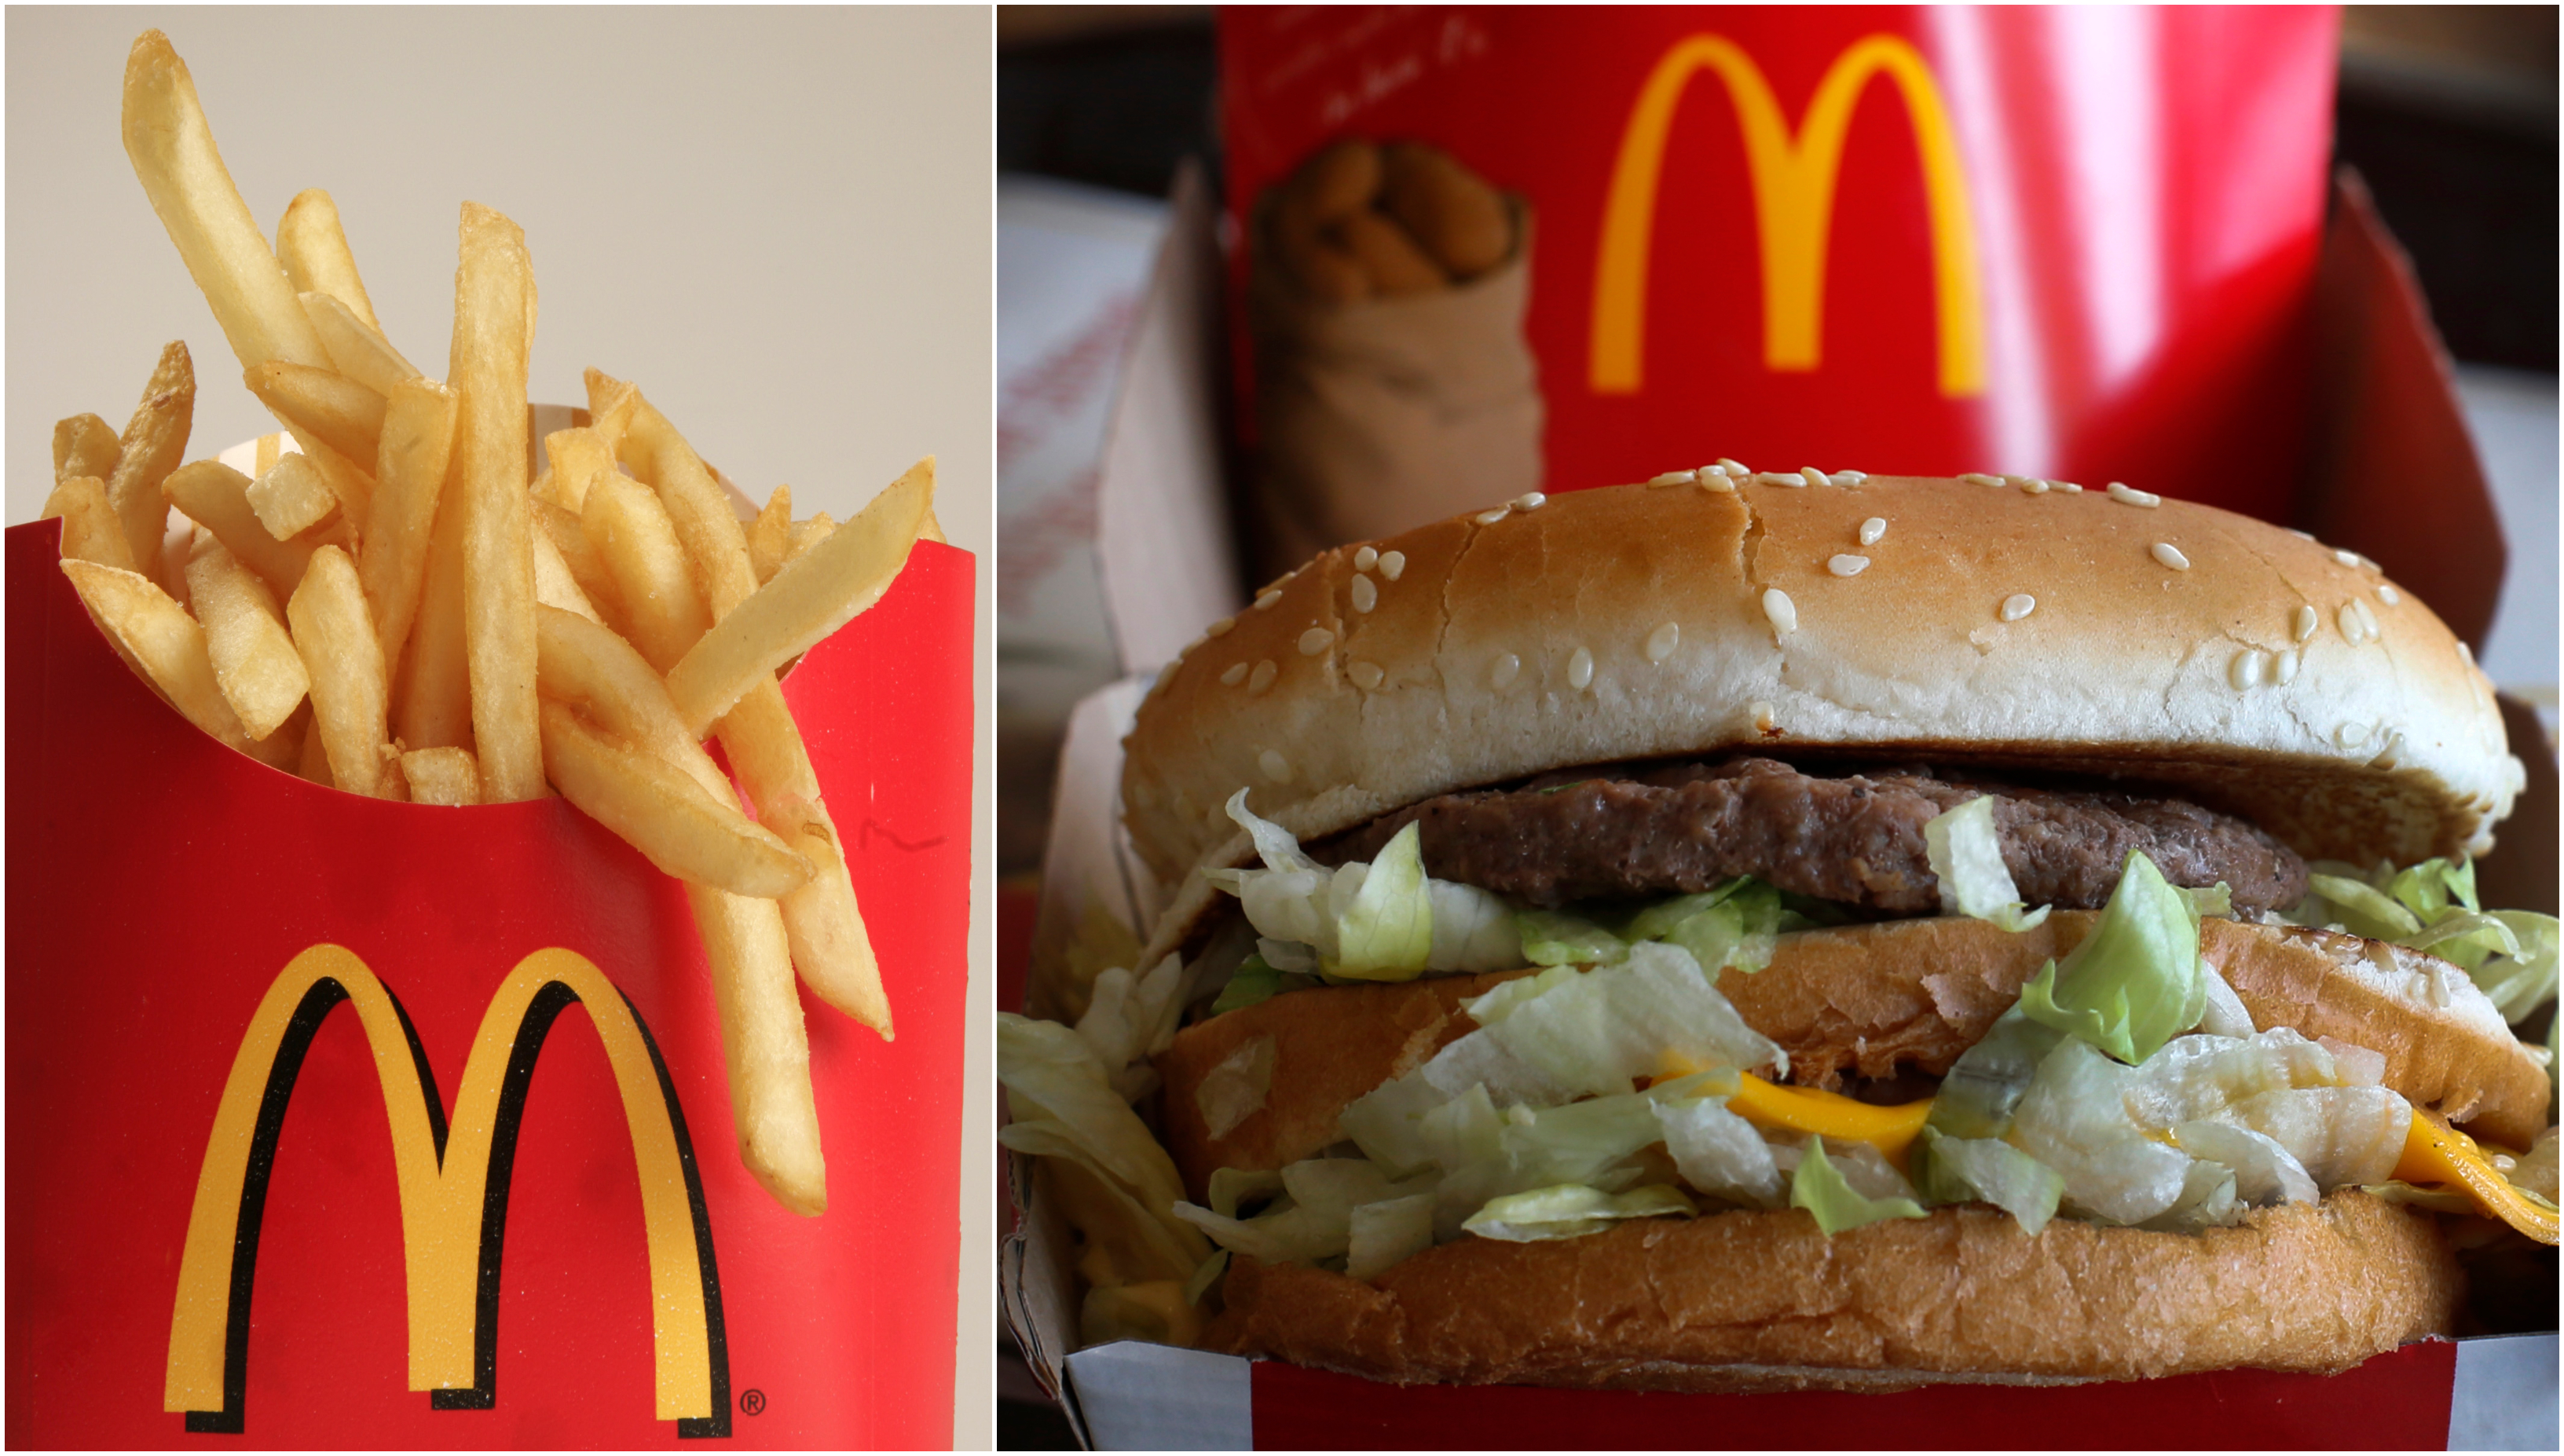 New trend drives people to McDonald’s: “It’s watered down”